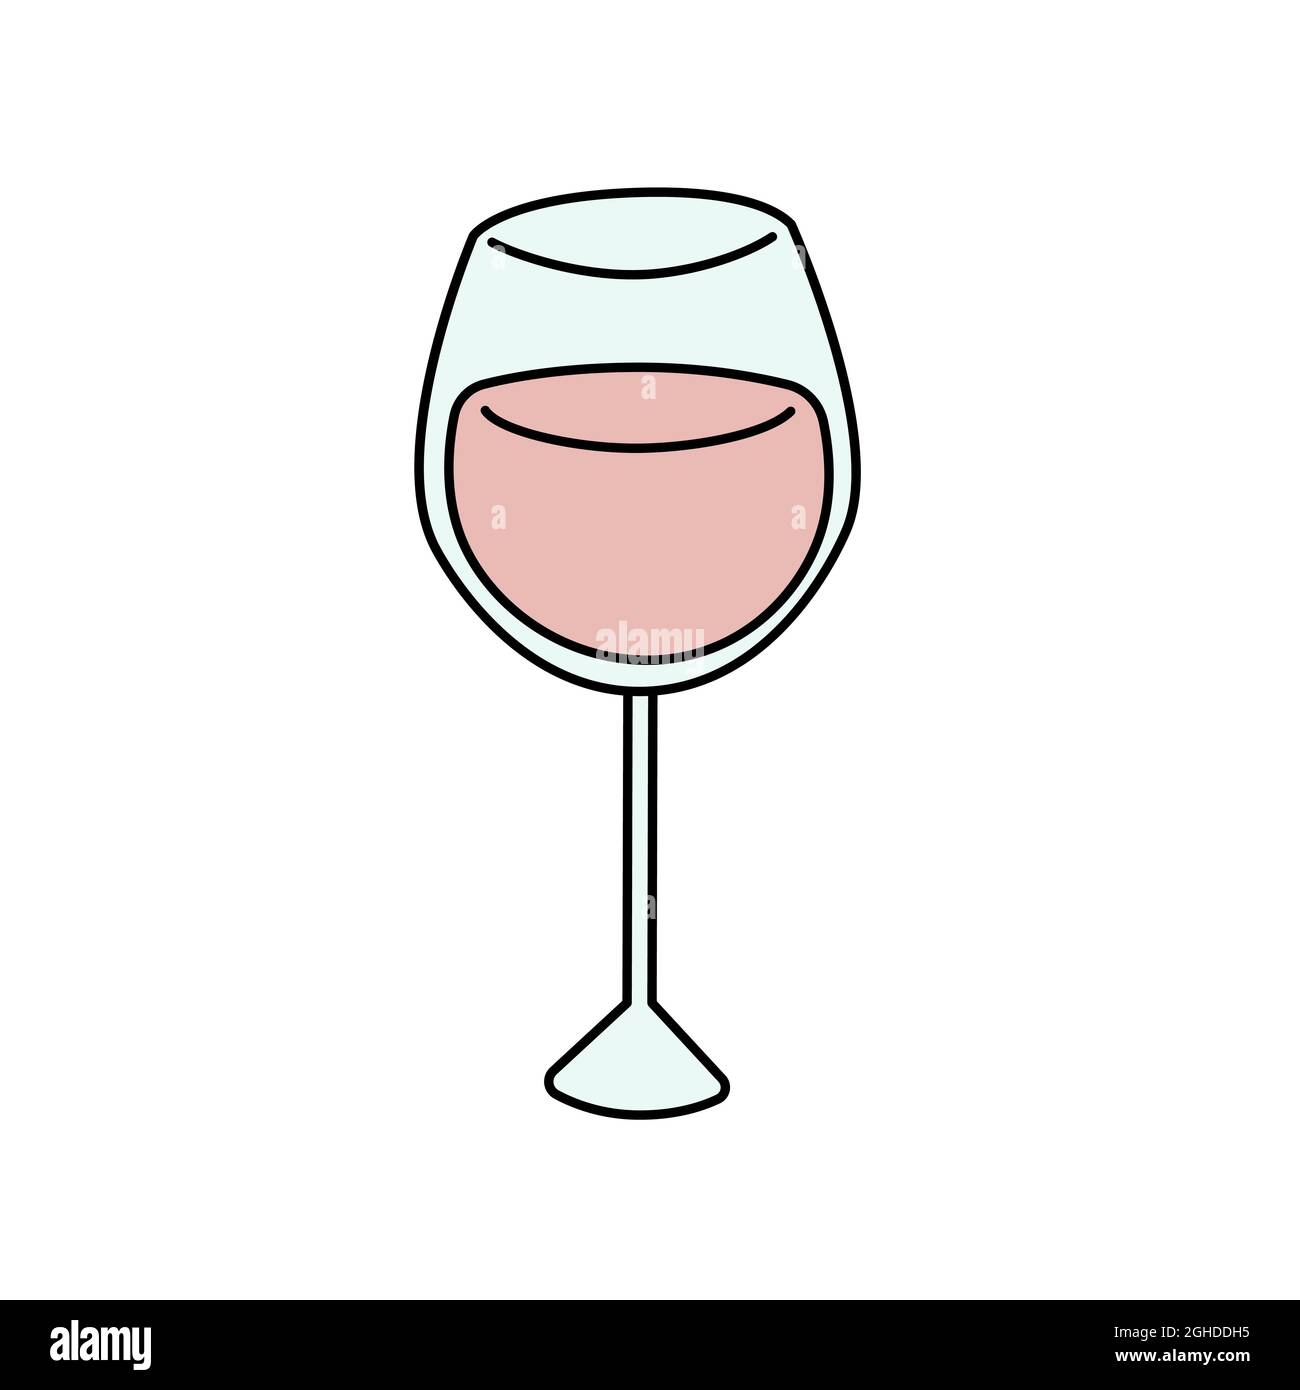 https://c8.alamy.com/comp/2GHDDH5/wine-glass-icon-in-doodle-style-vector-illustration-isolated-on-white-background-cute-cartoon-sign-wedding-toasting-wine-glasses-with-sparkling-2GHDDH5.jpg